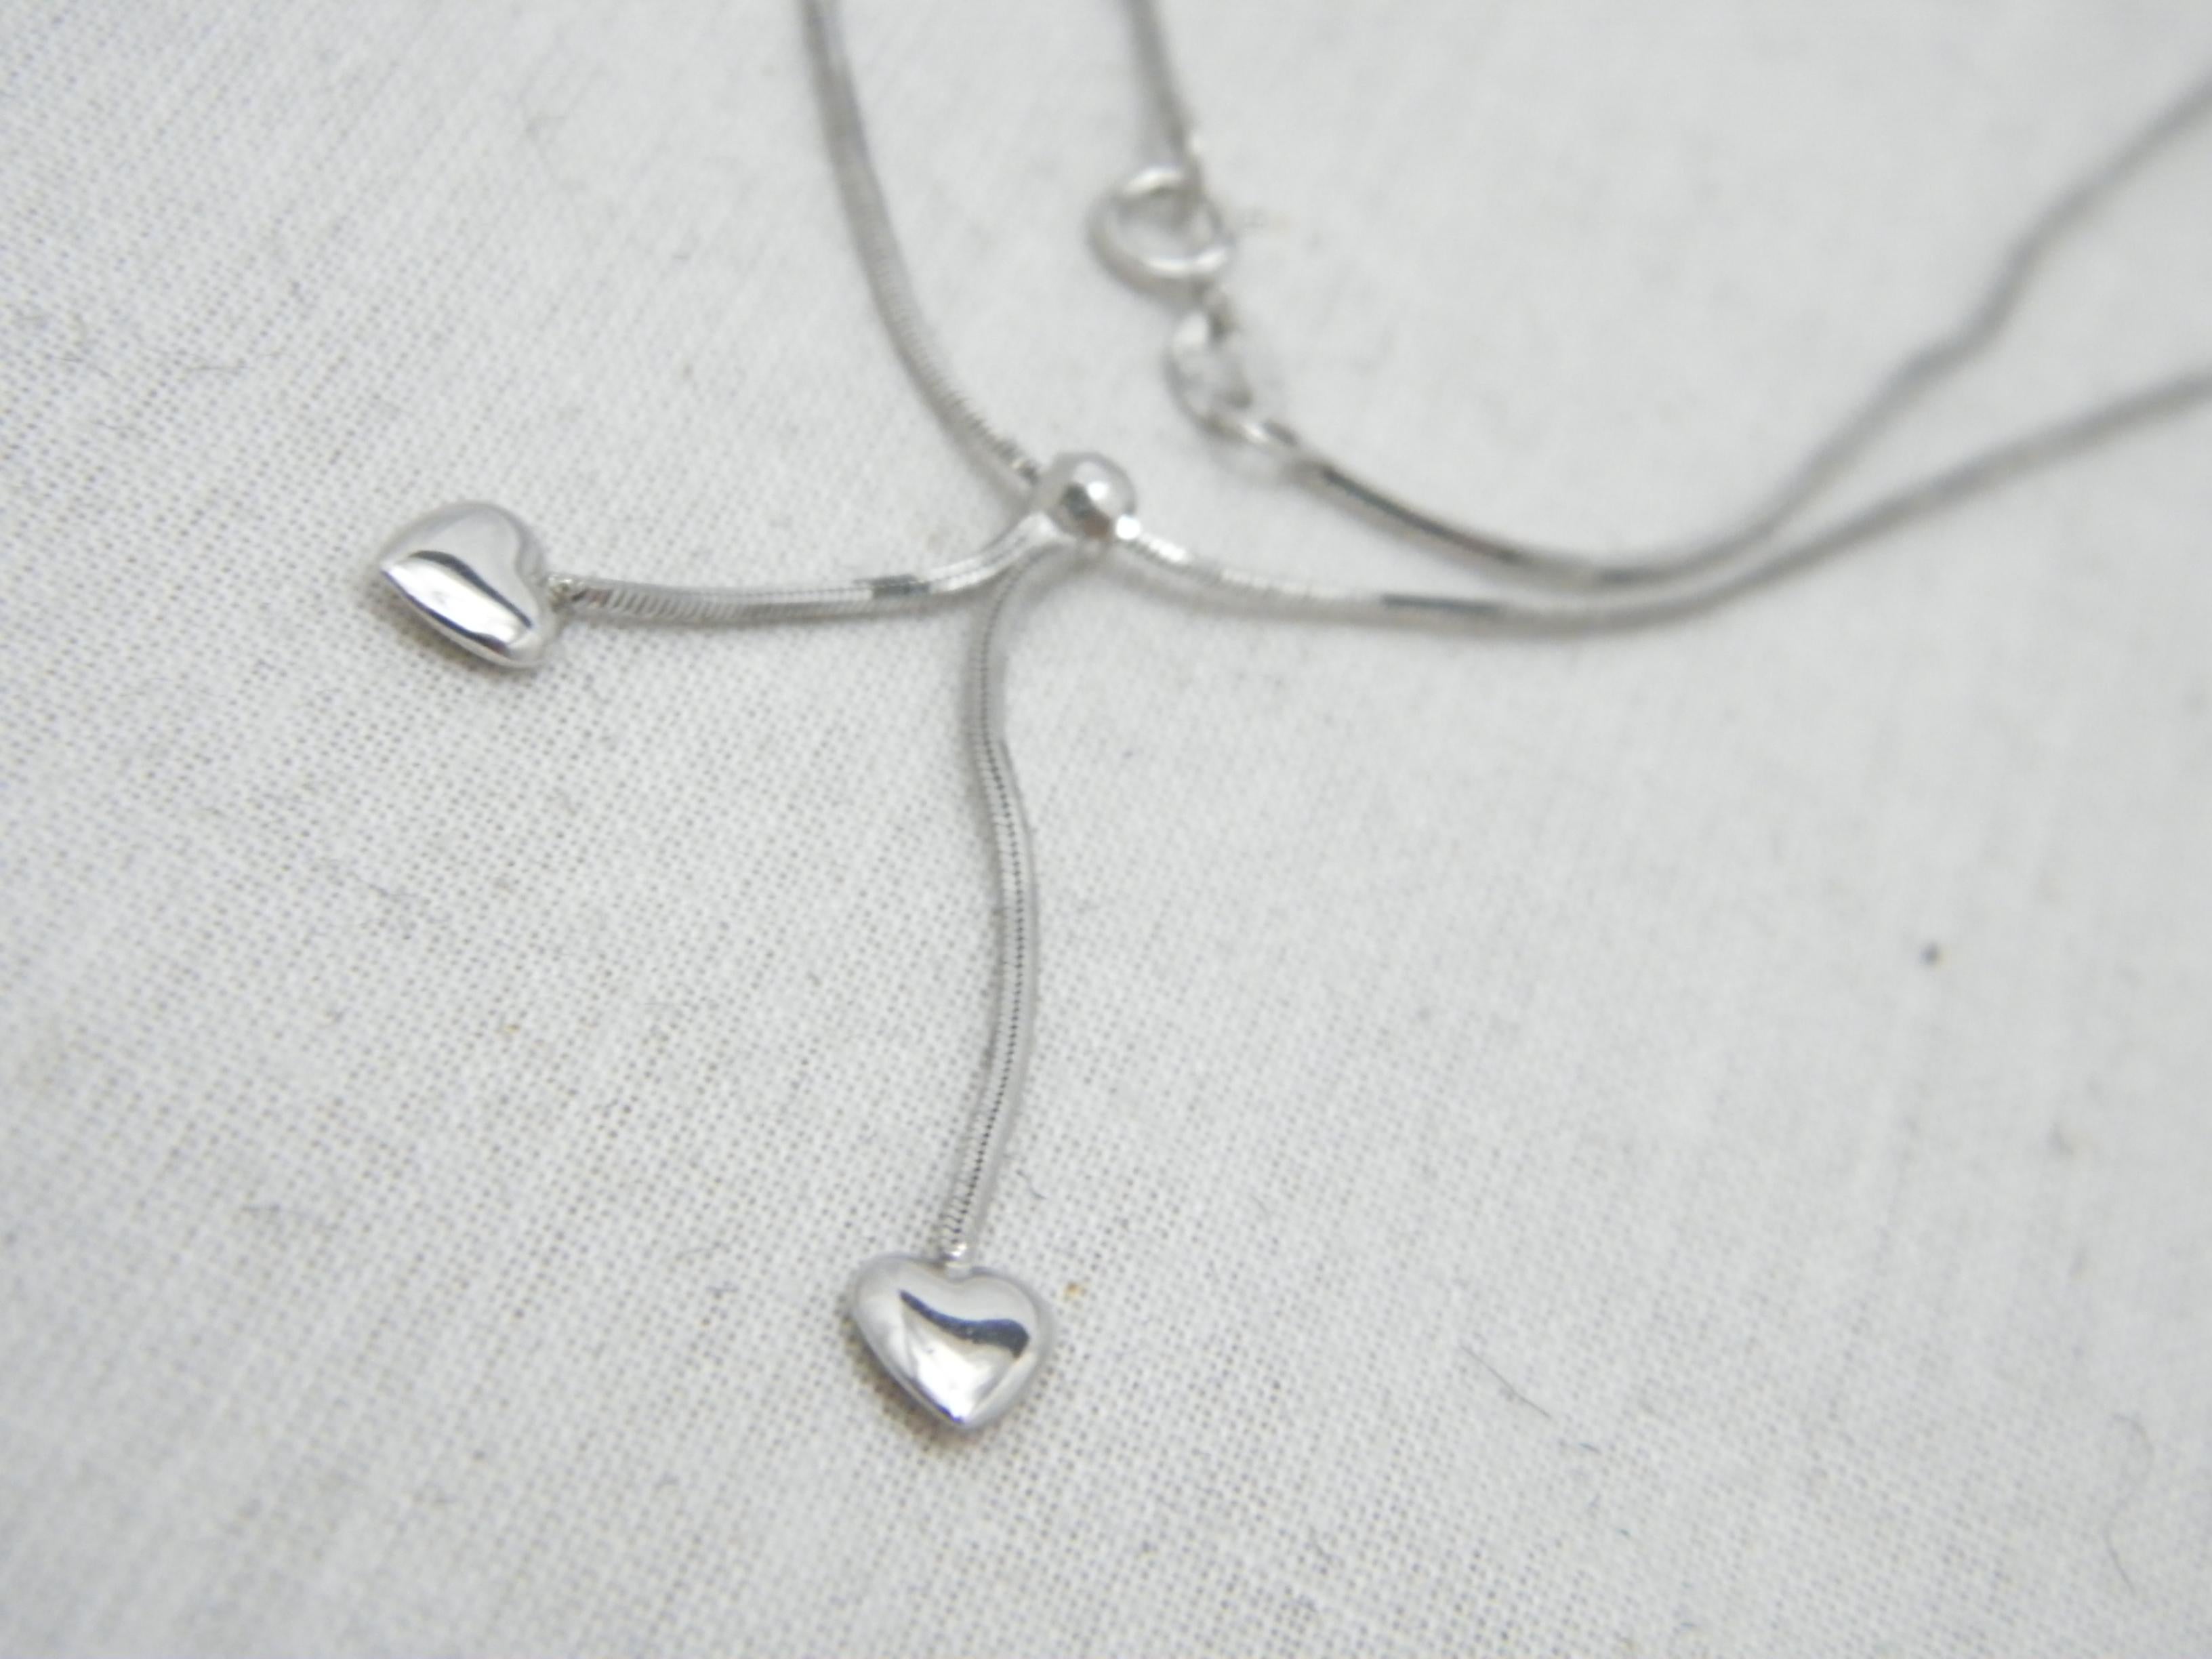 Vintage 9ct White Gold Twin Heart Lariat Pendant Necklace 16 Inch Snake Chain For Sale 1